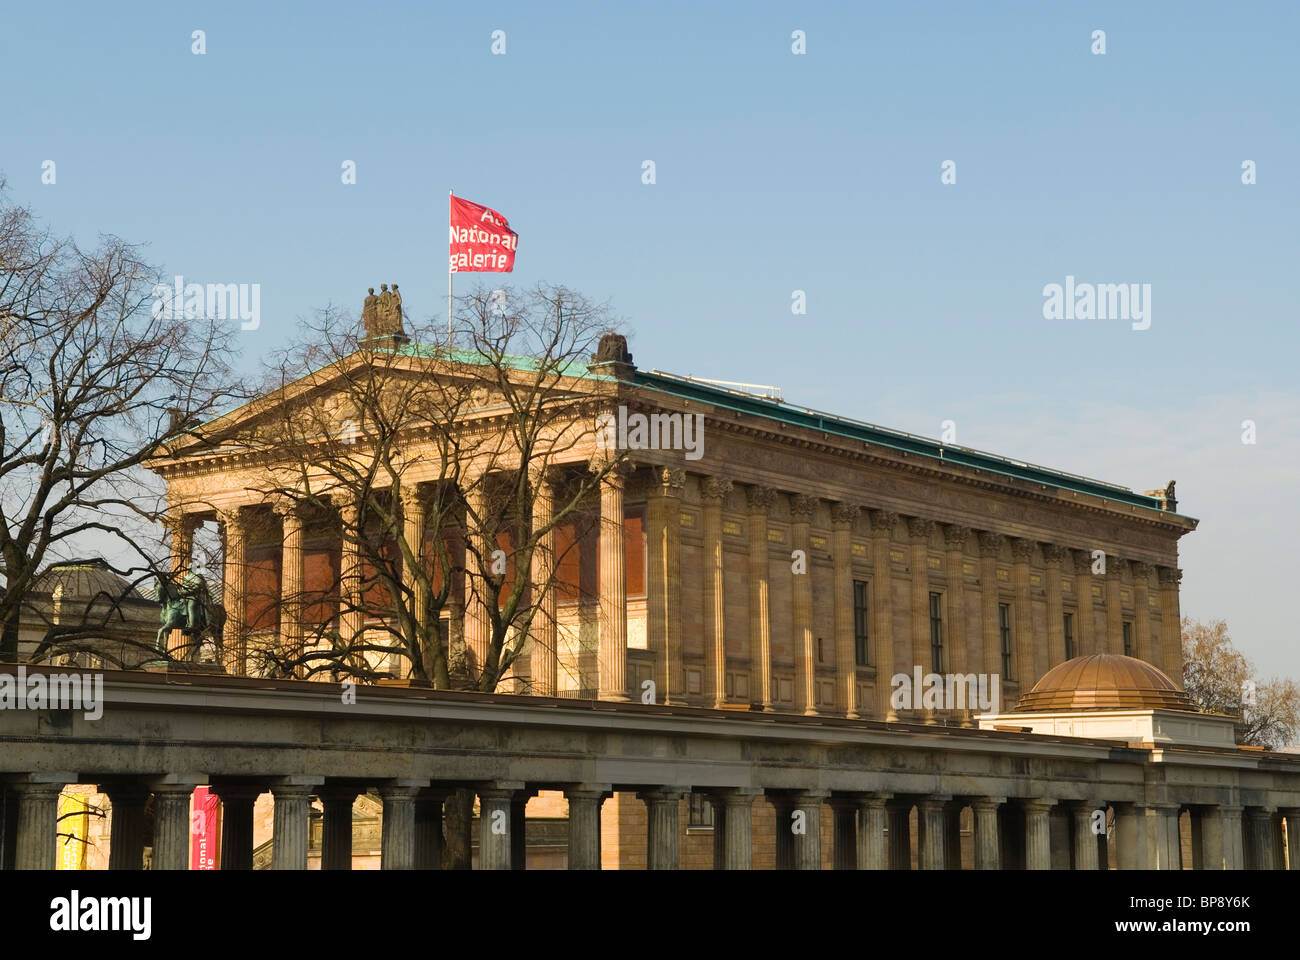 Old National history museum building Berlin Germany Stock Photo